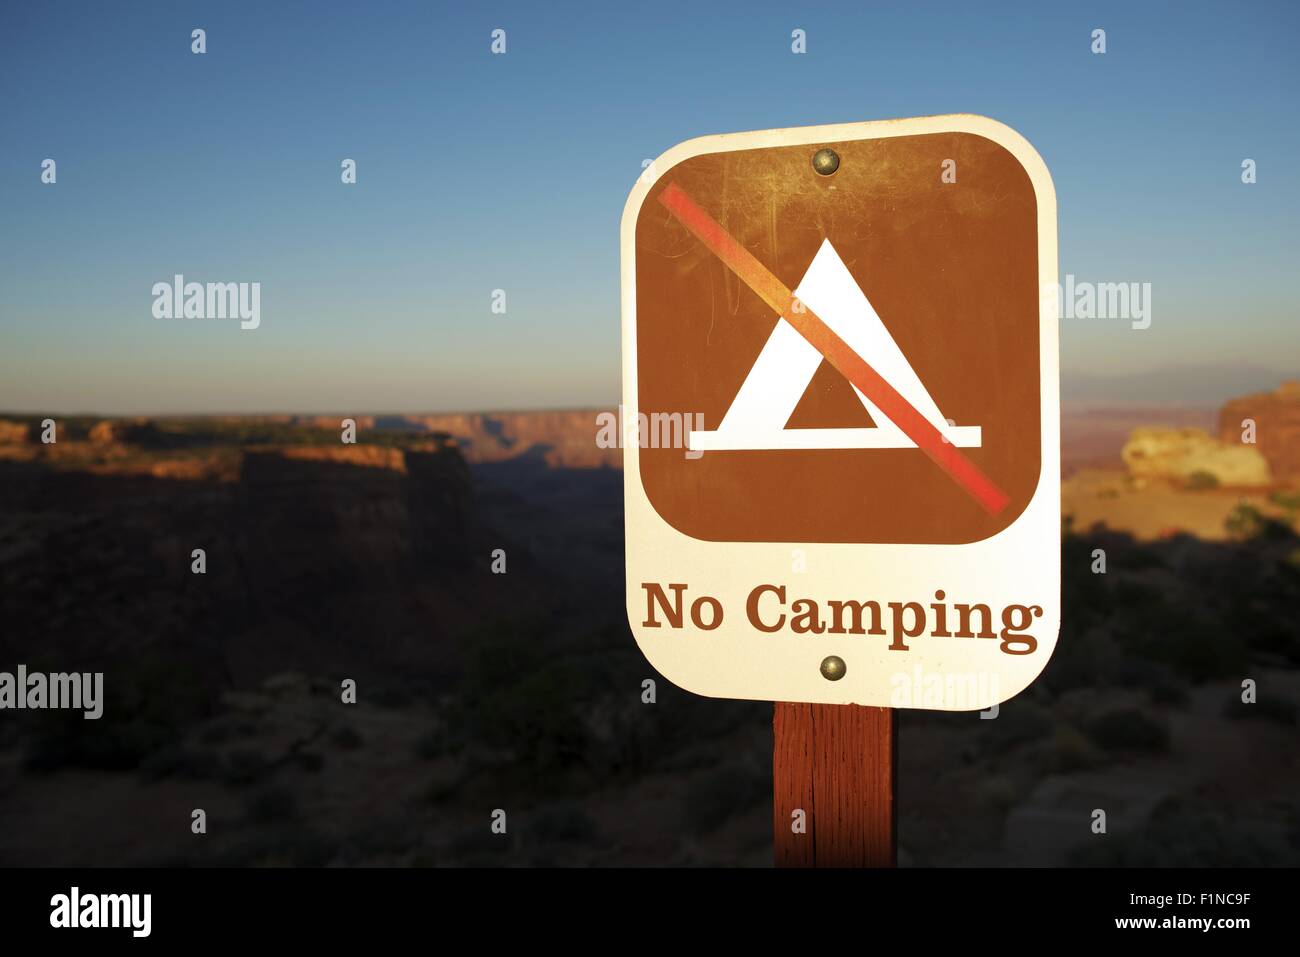 No Camping Sign in Canyonlands National Park, Utah, U.S.A. Travel Photography Collection. Stock Photo